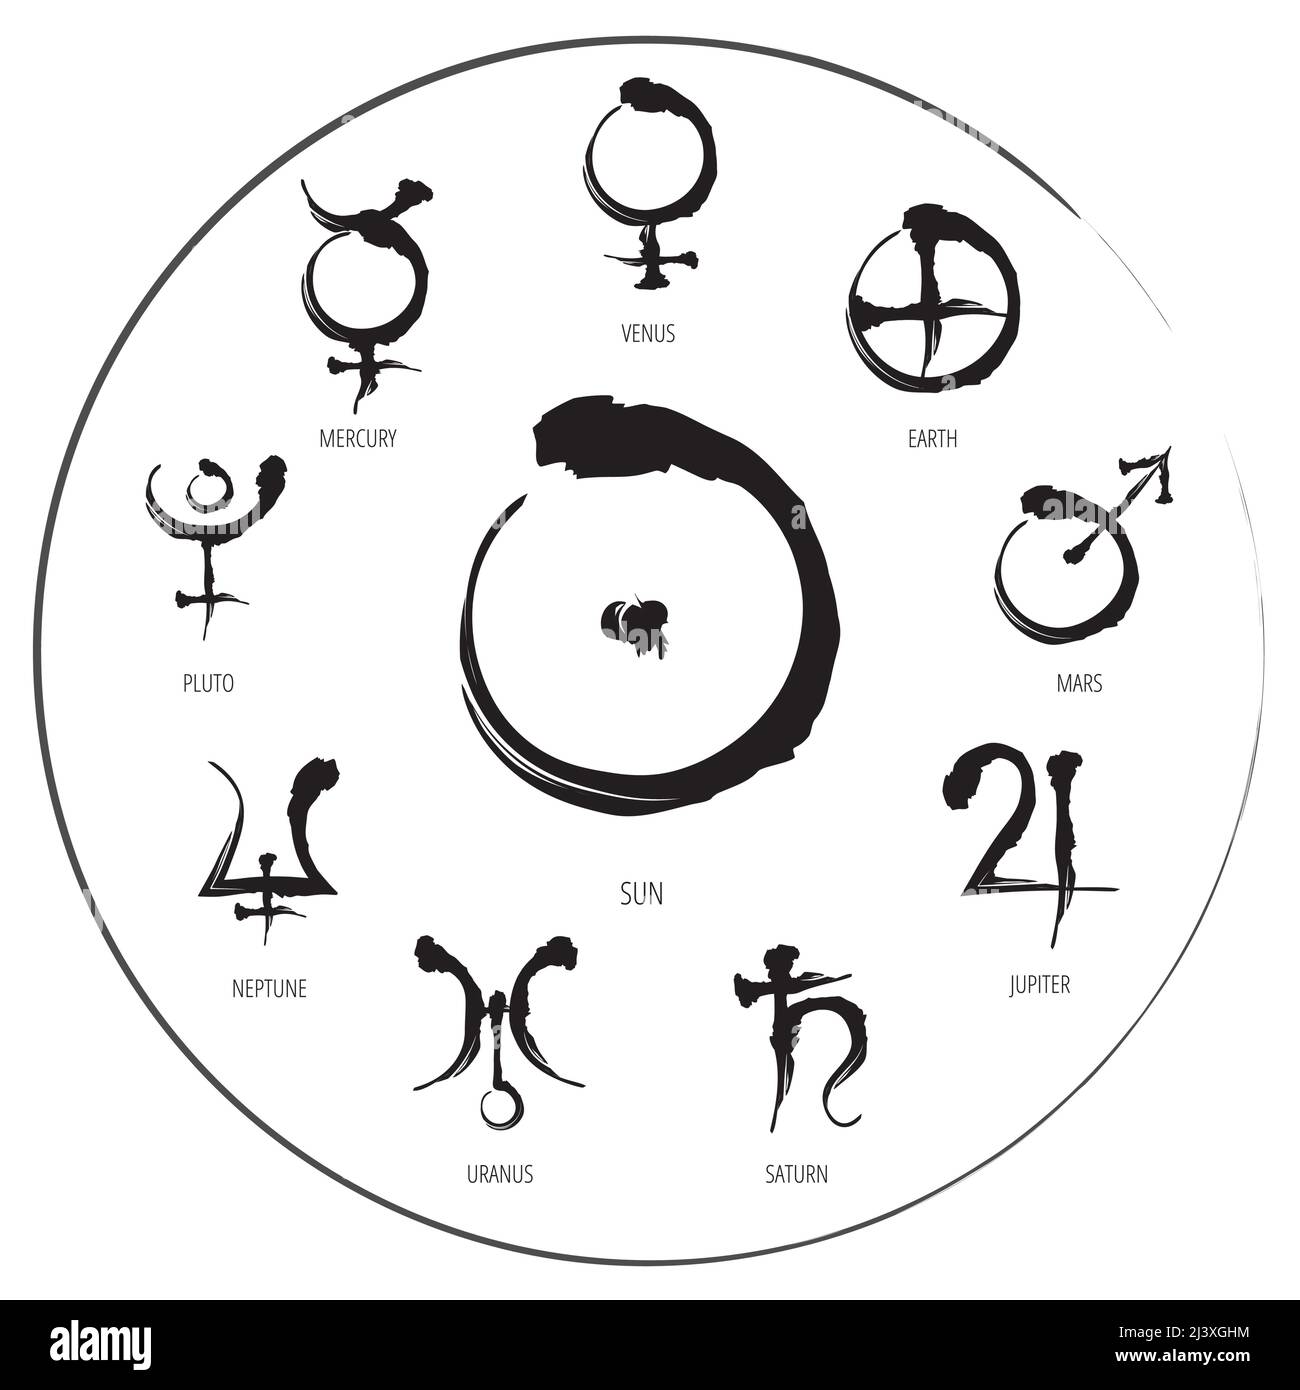 Table Of Astrology Symbols: Hand Drawn Planet Hieroglyph in circle Stock Vector